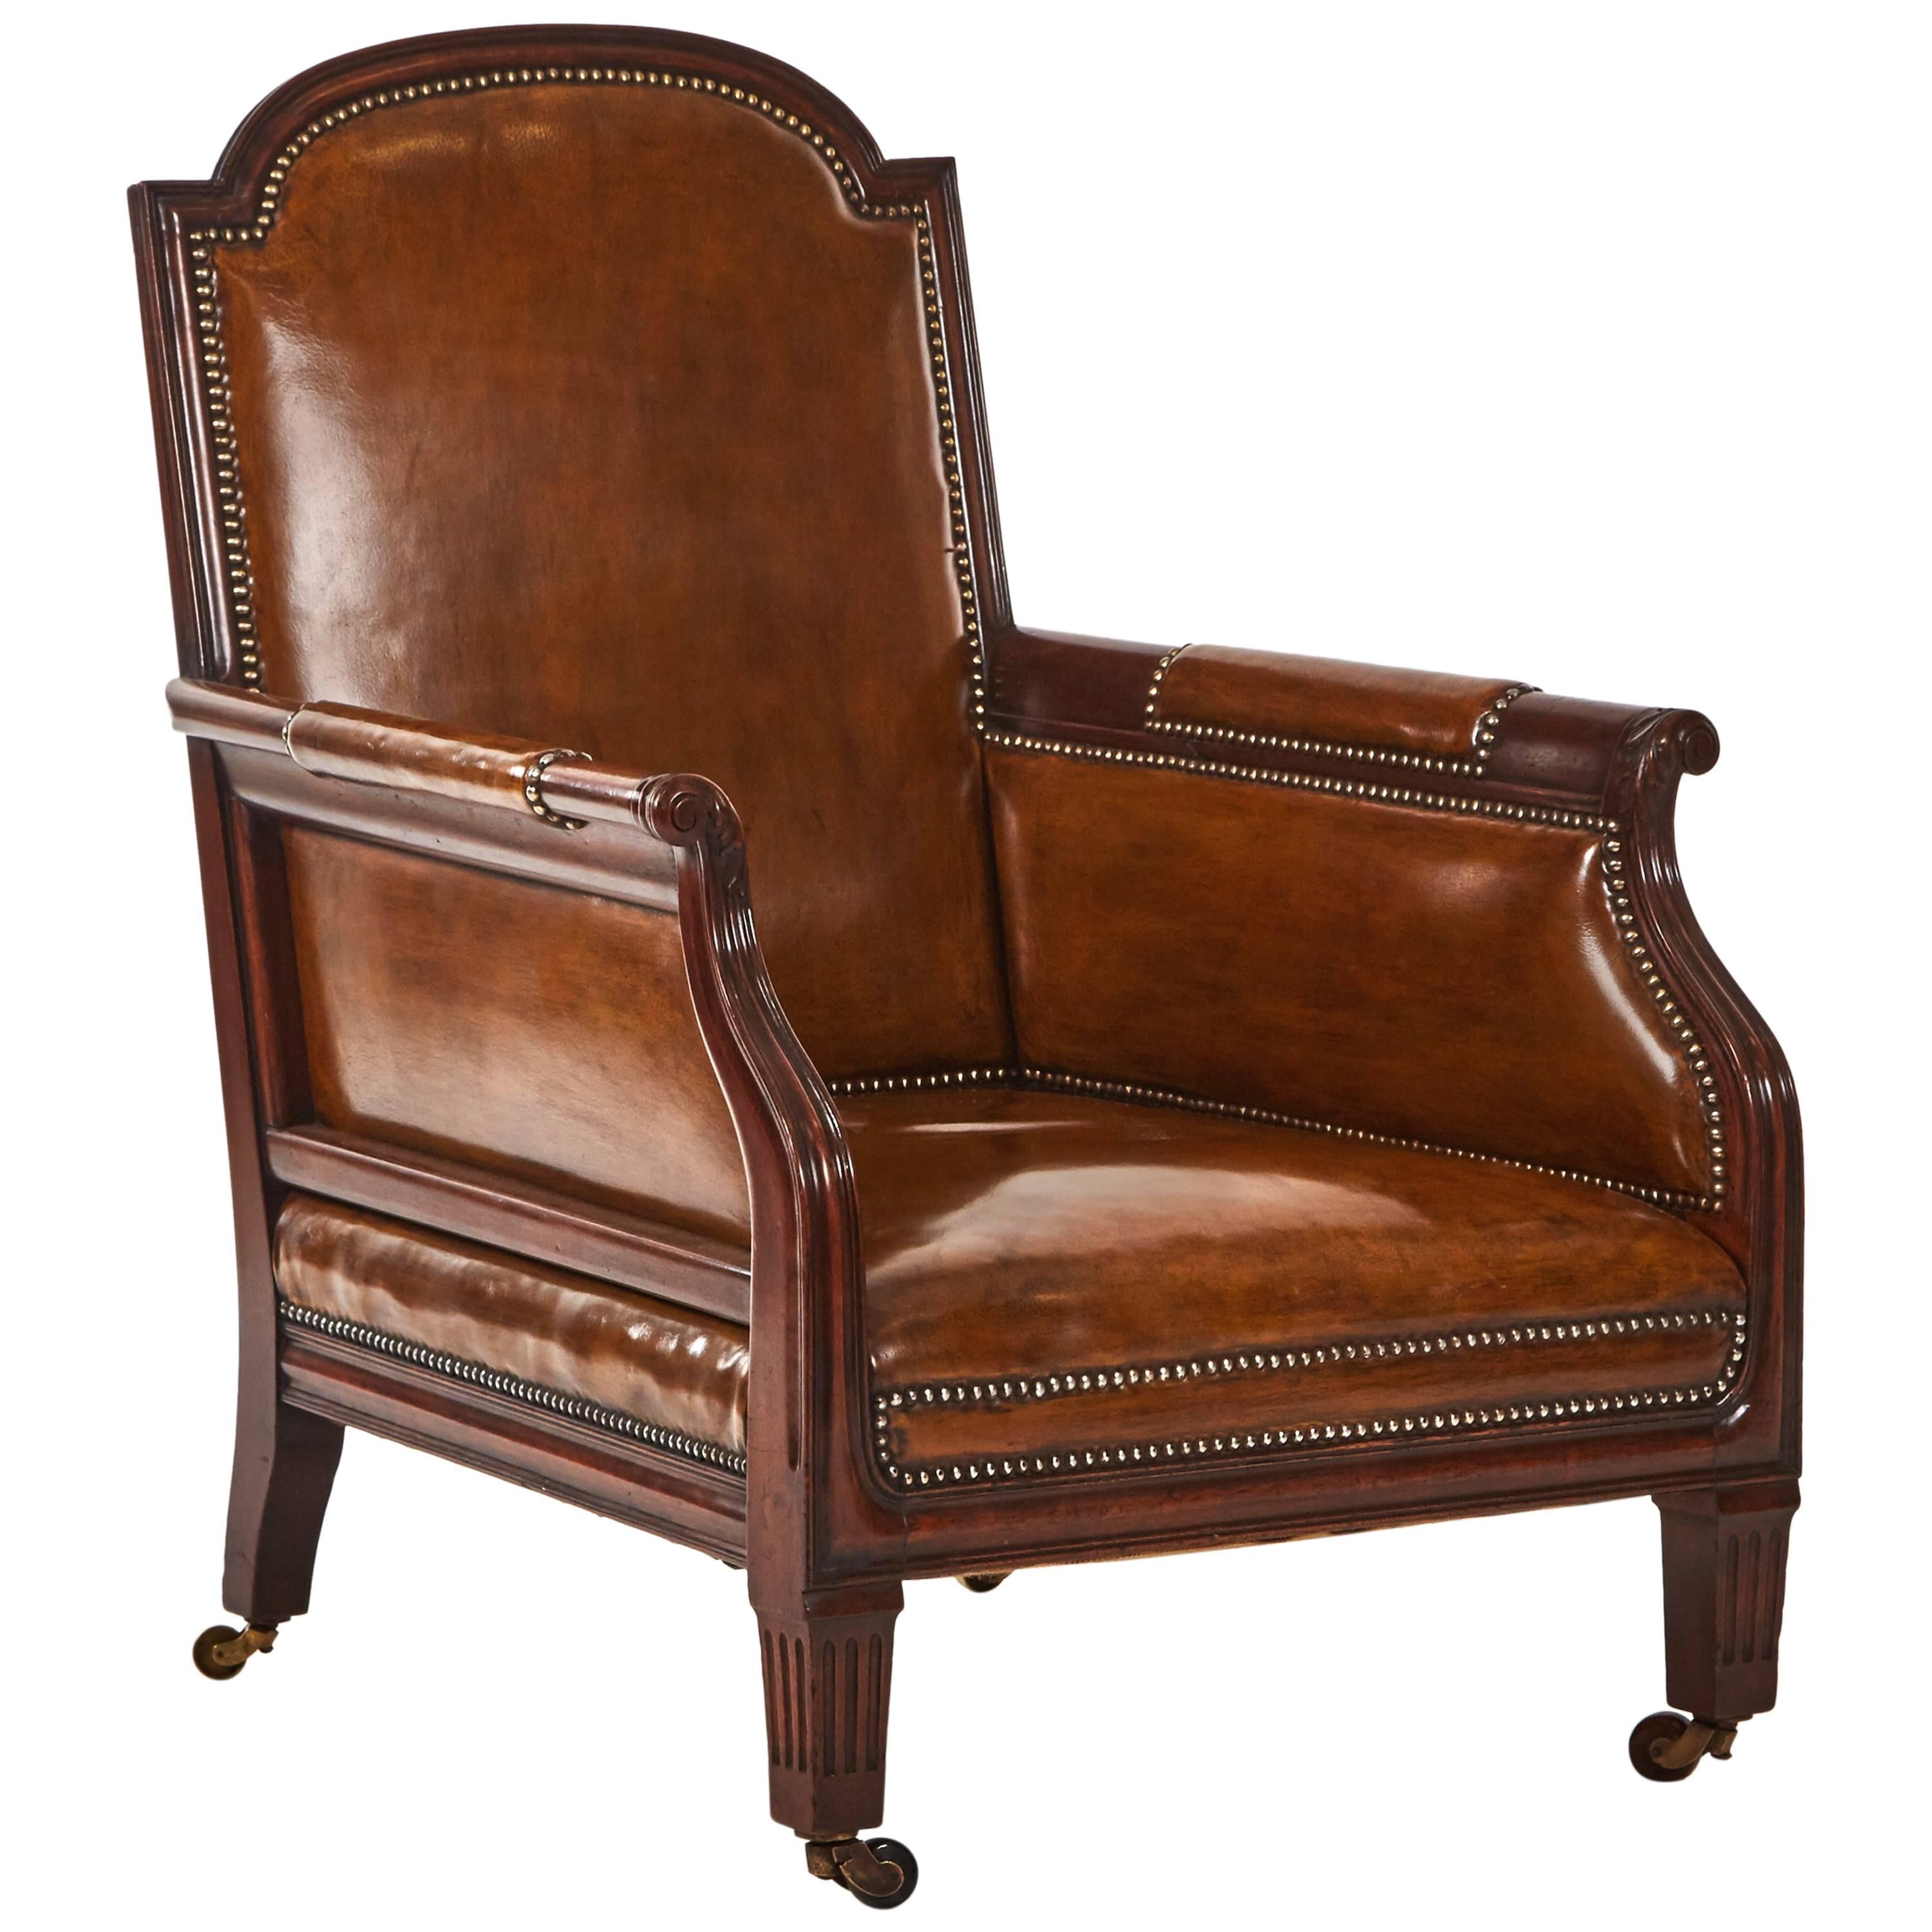 1880s English Leather and Studded Armchair on Castors 